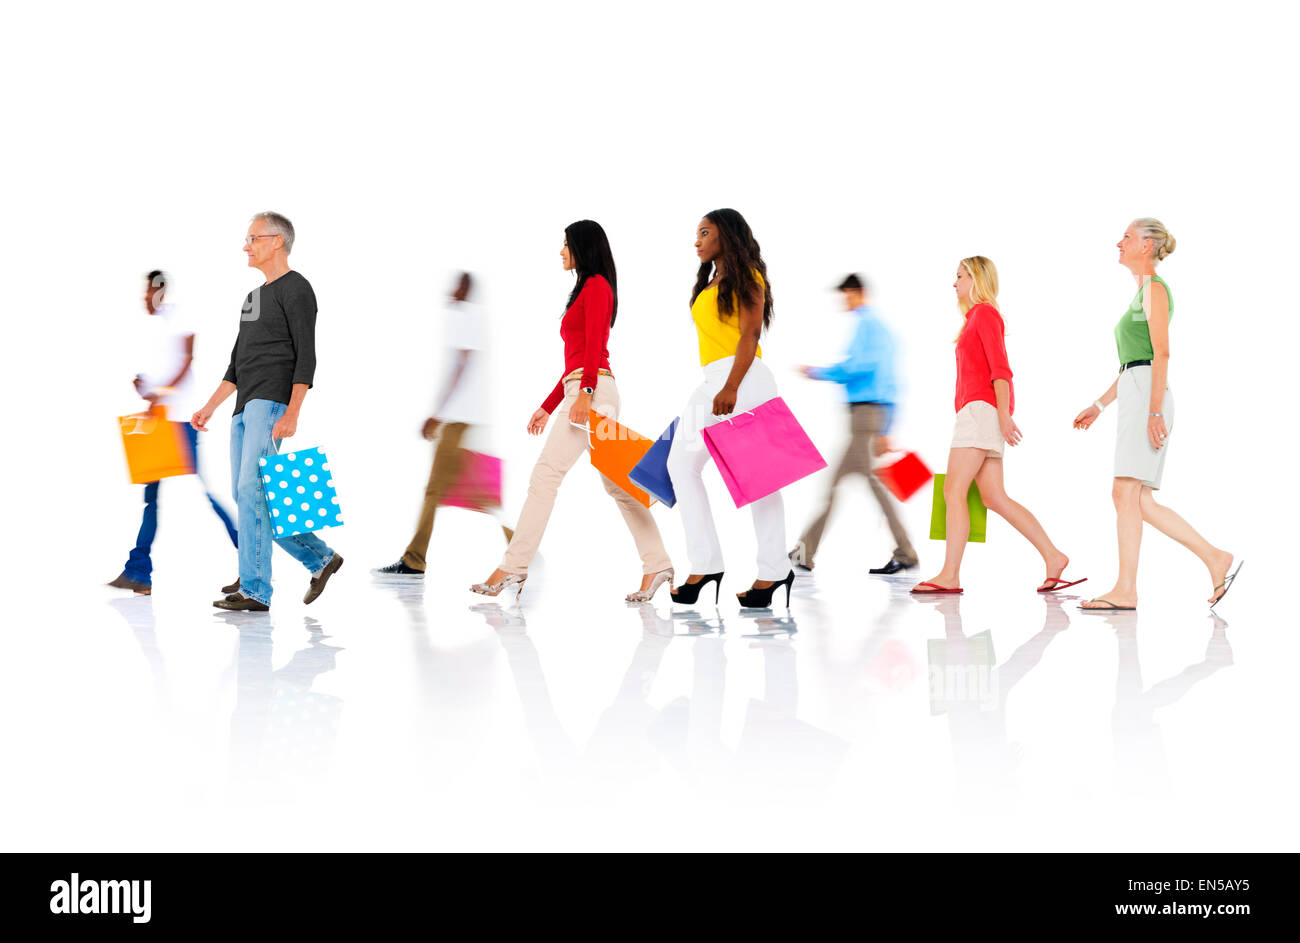 Group of Diverse People Walking with Shopping Bags Stock Photo